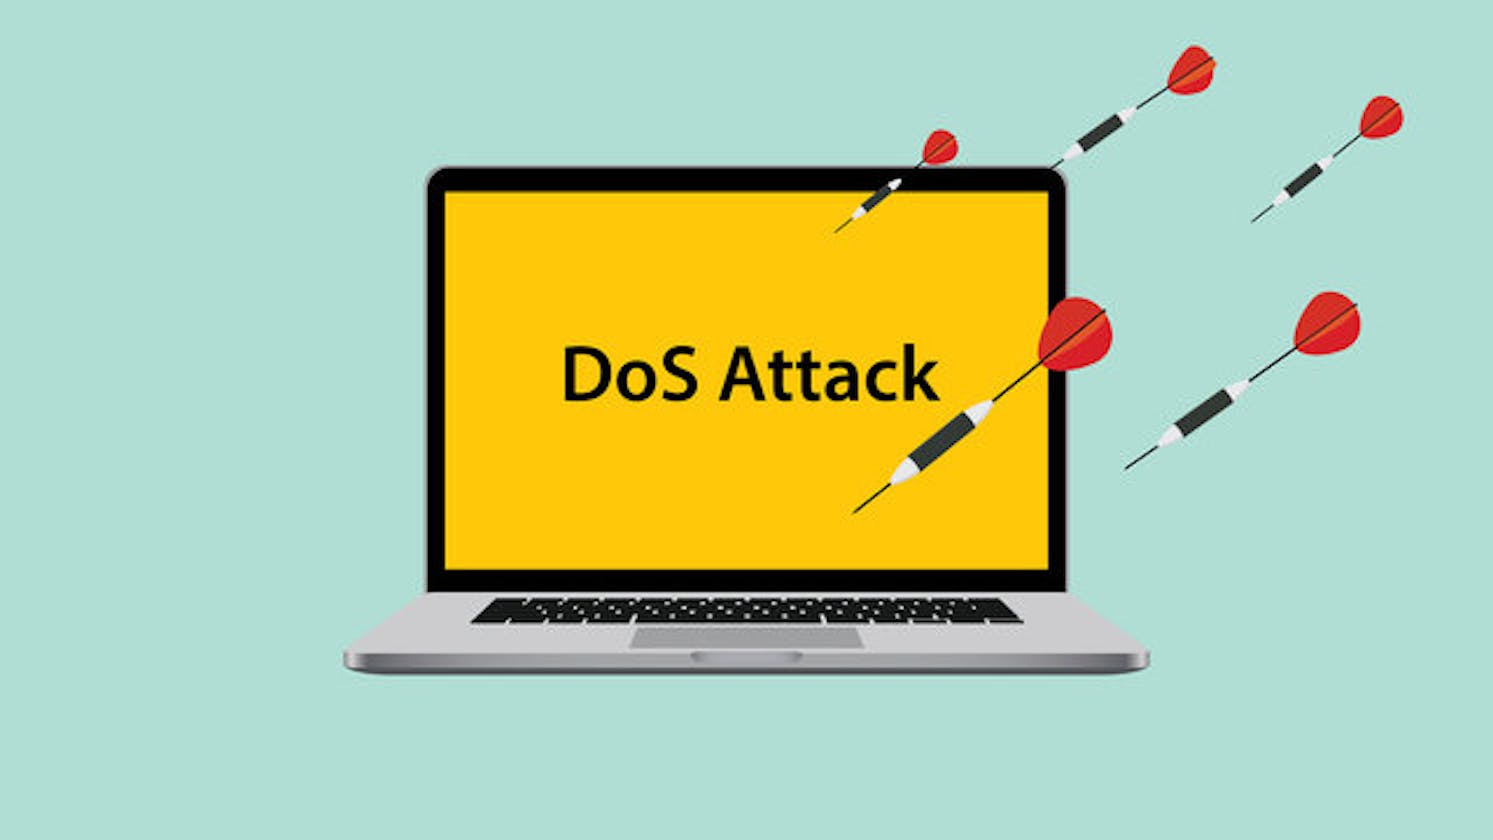 Denial of Service Dos & Distributed Denial of Service DDos